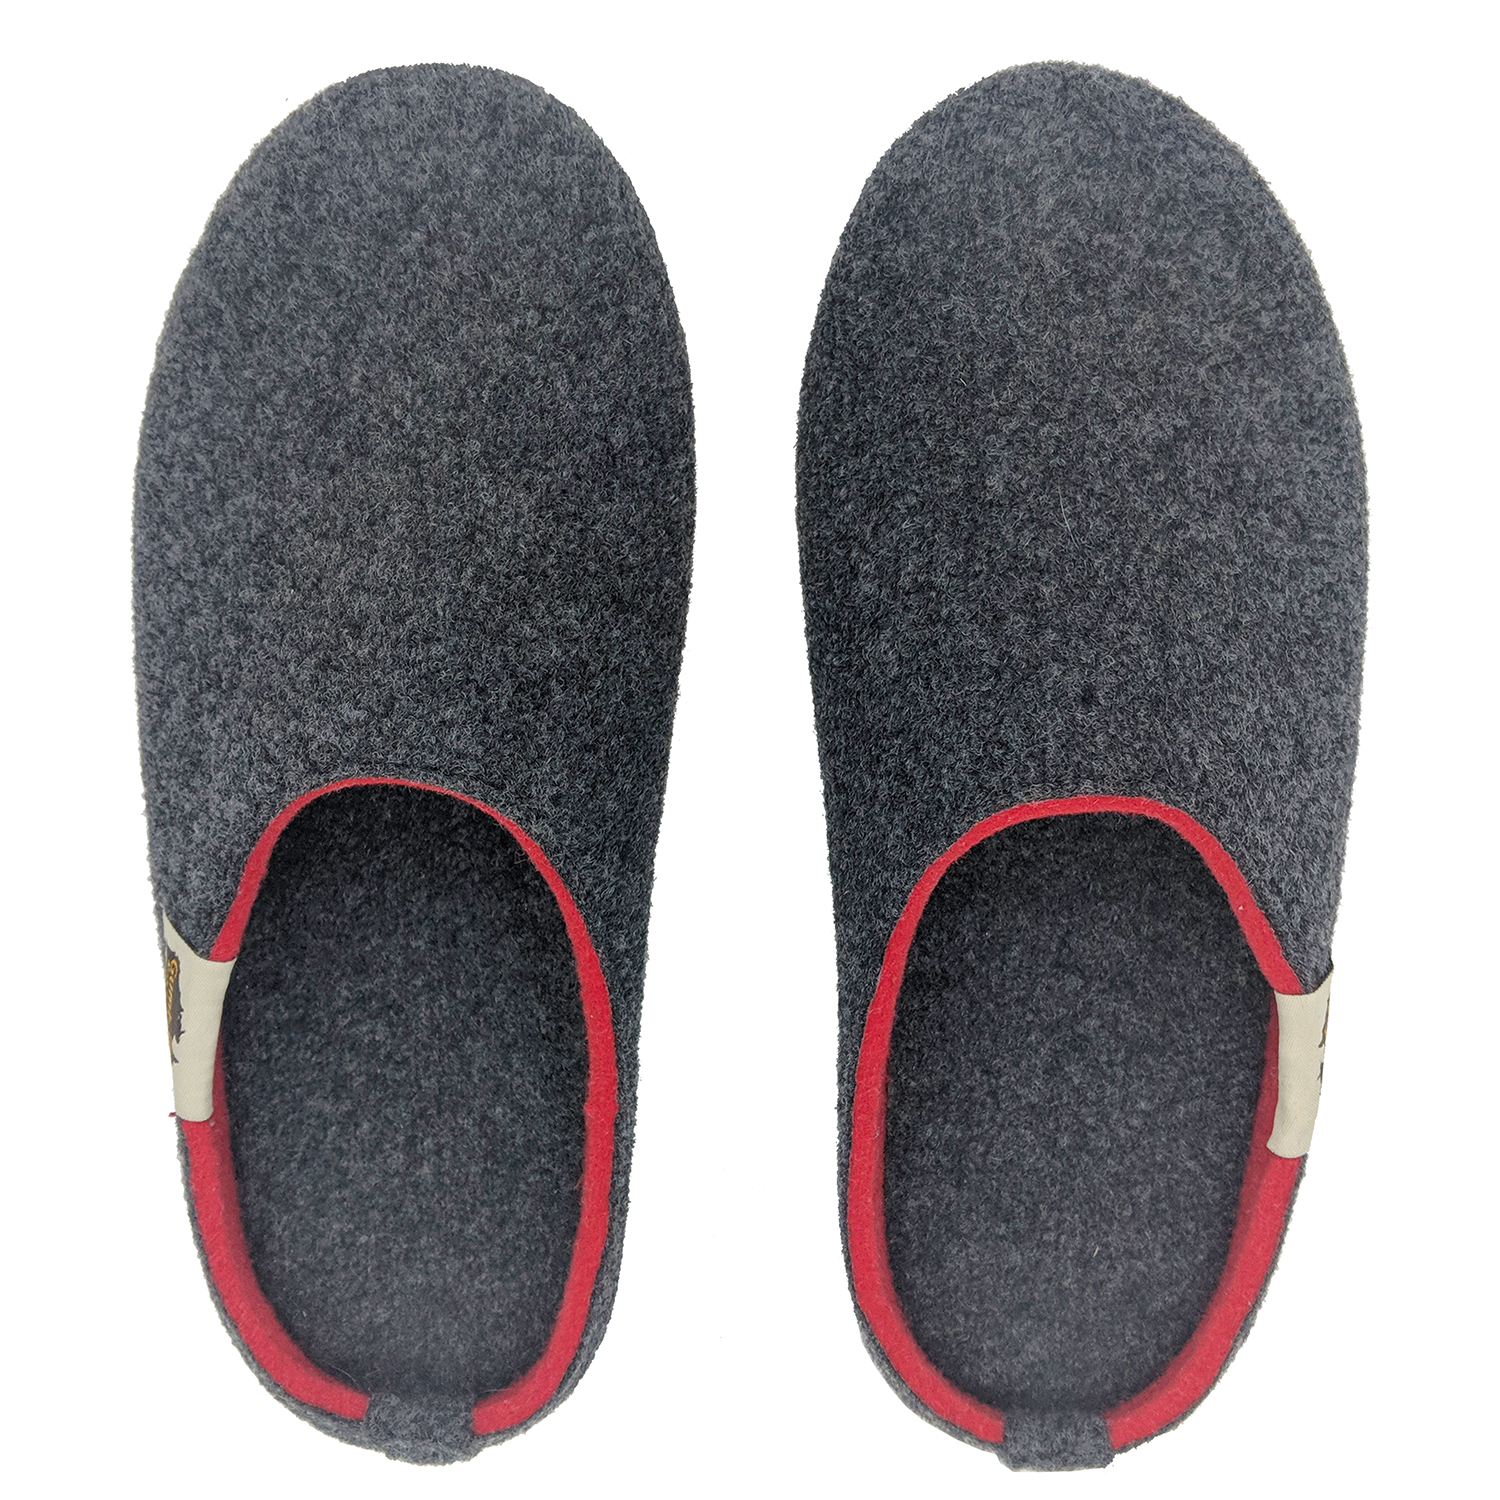 GUMBIES – Outback Slipper, Charcoal Red 